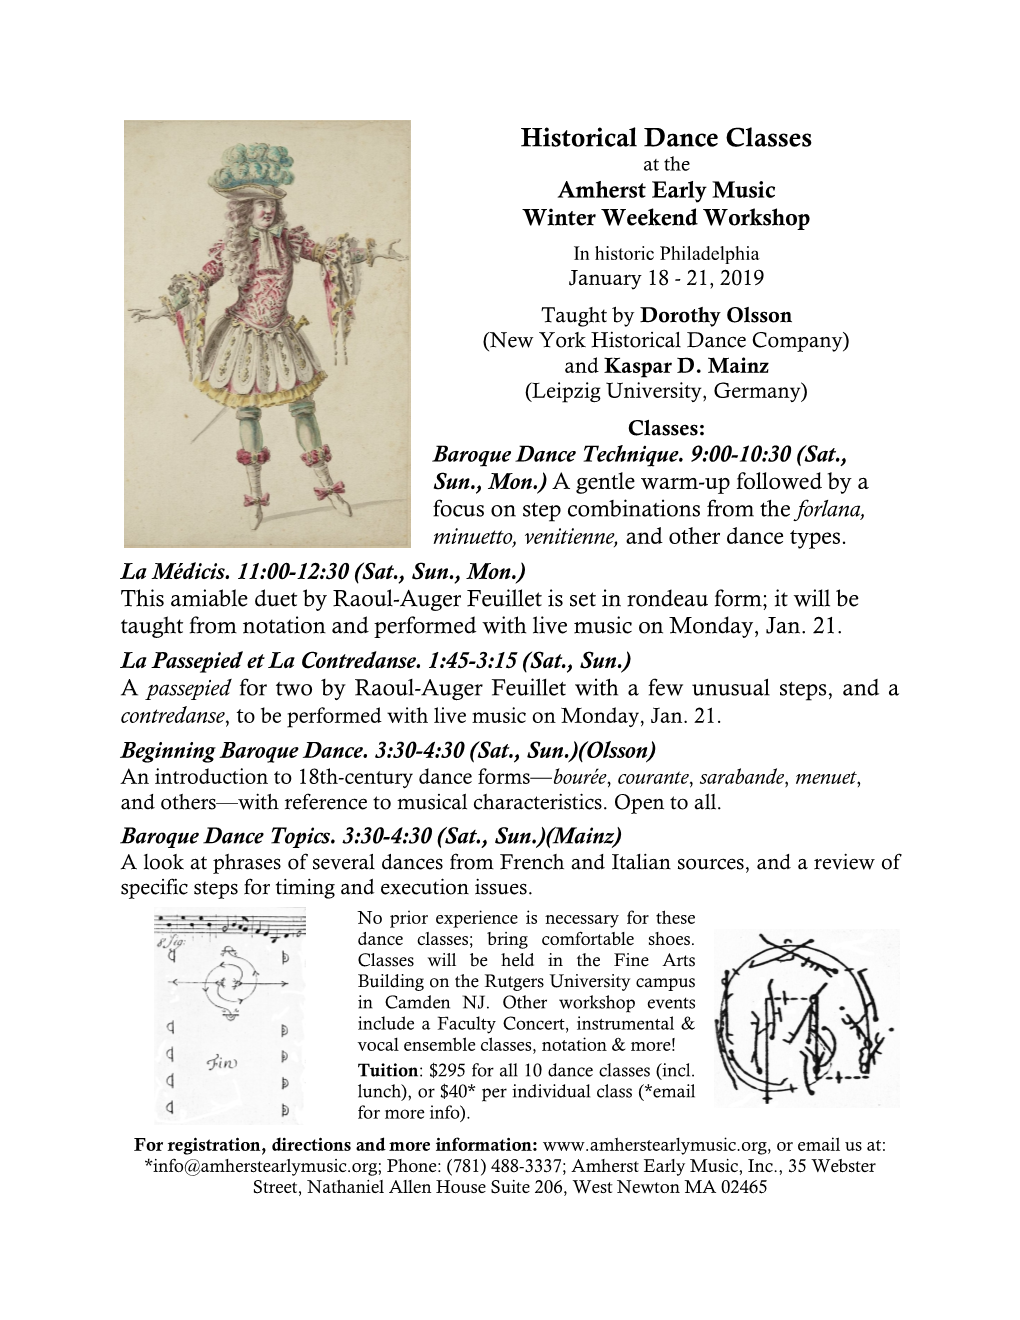 Historical Dance Classes at the Amherst Early Music Winter Weekend Workshop